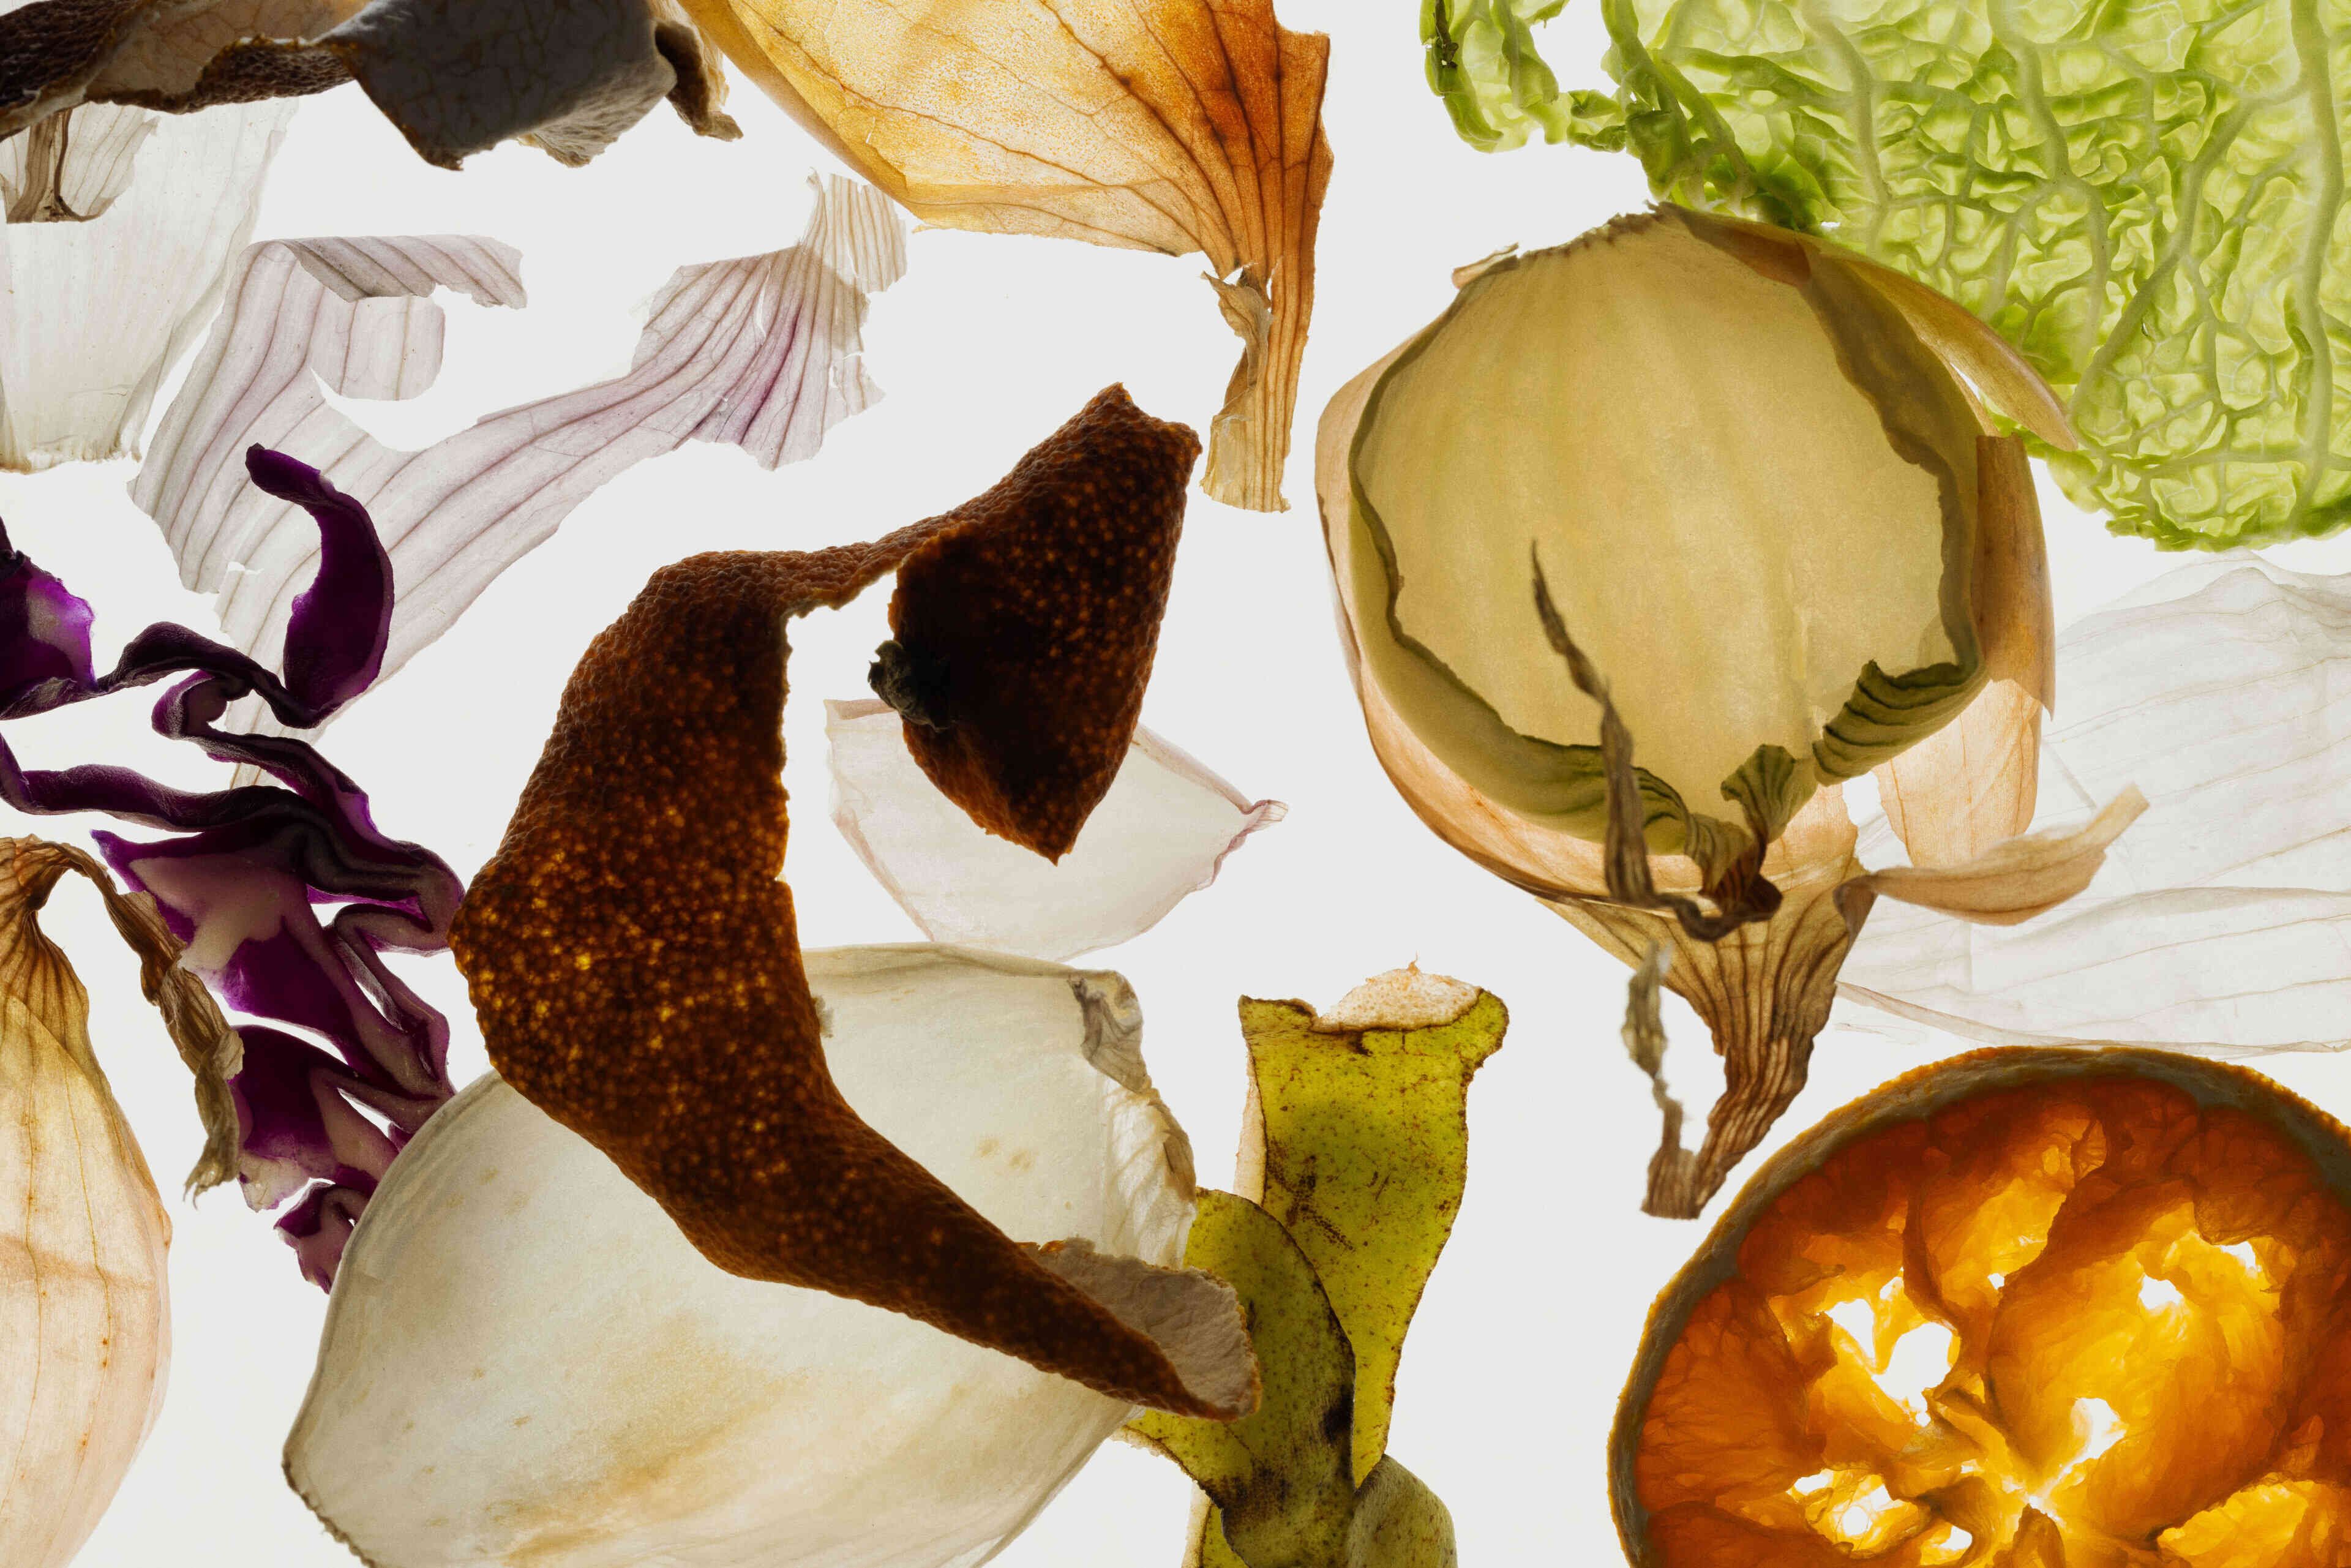 Vegetable and food peels lying artistically on a white background